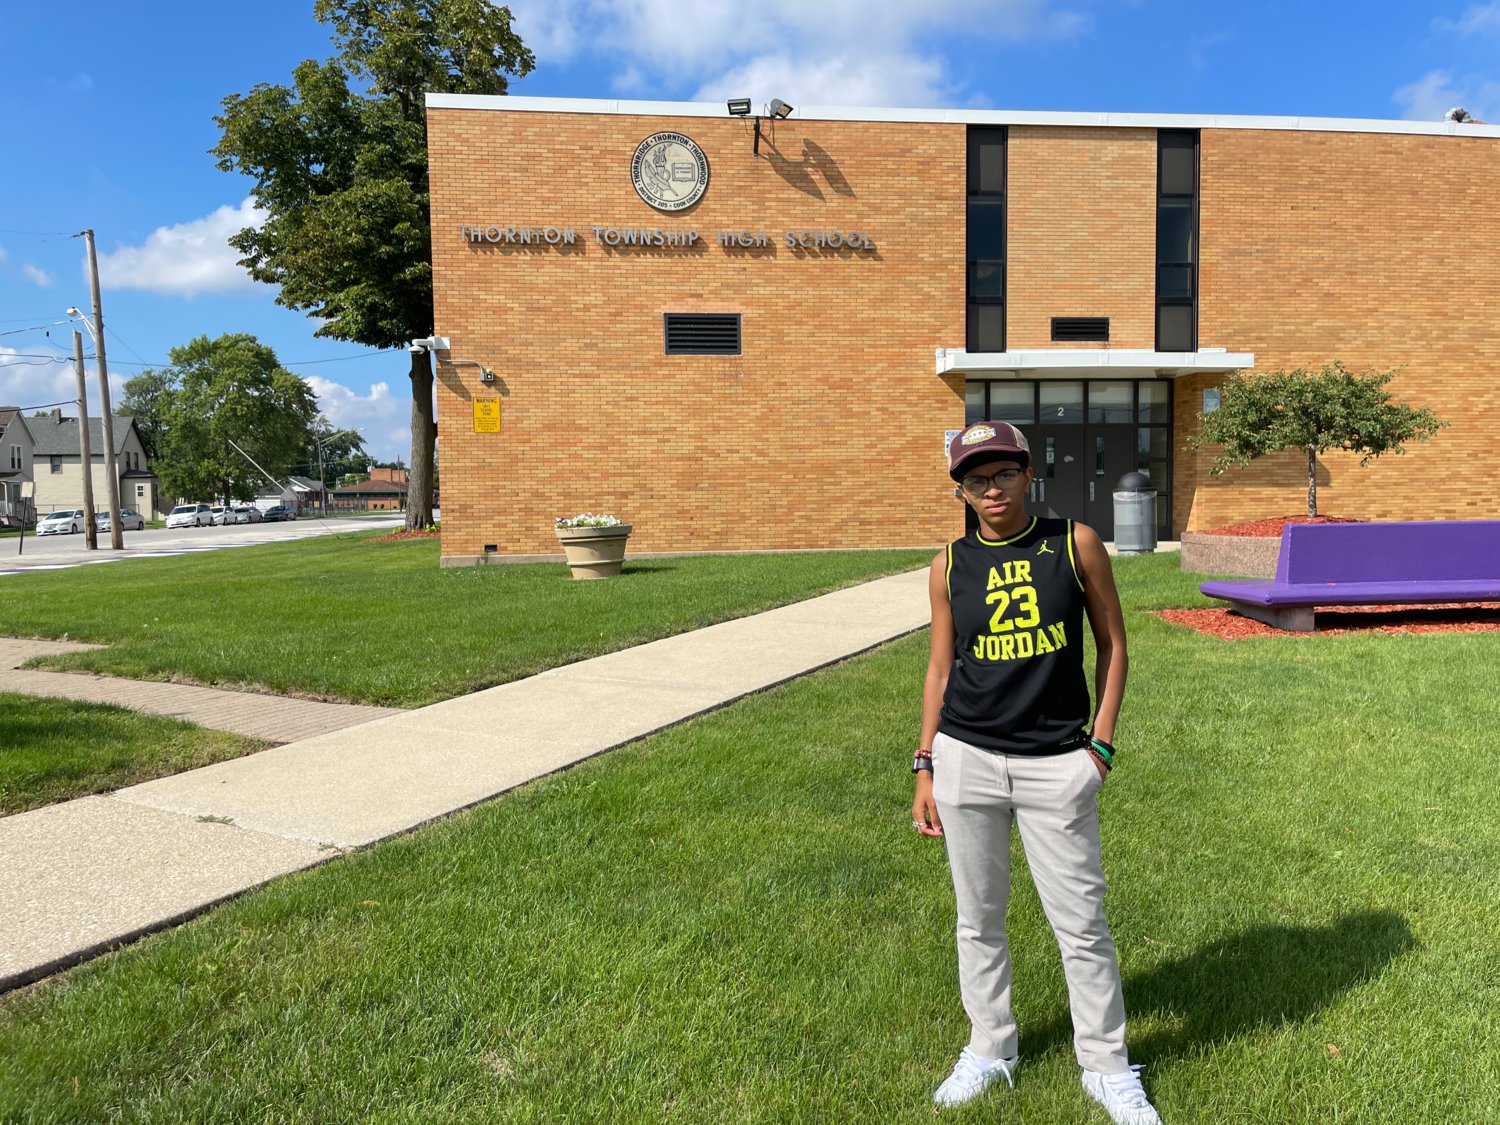 Amethyst Davis, founder of the Harvey World Herald, stands in front of Thornton Township High School, which got the nickname “Harvey World.”